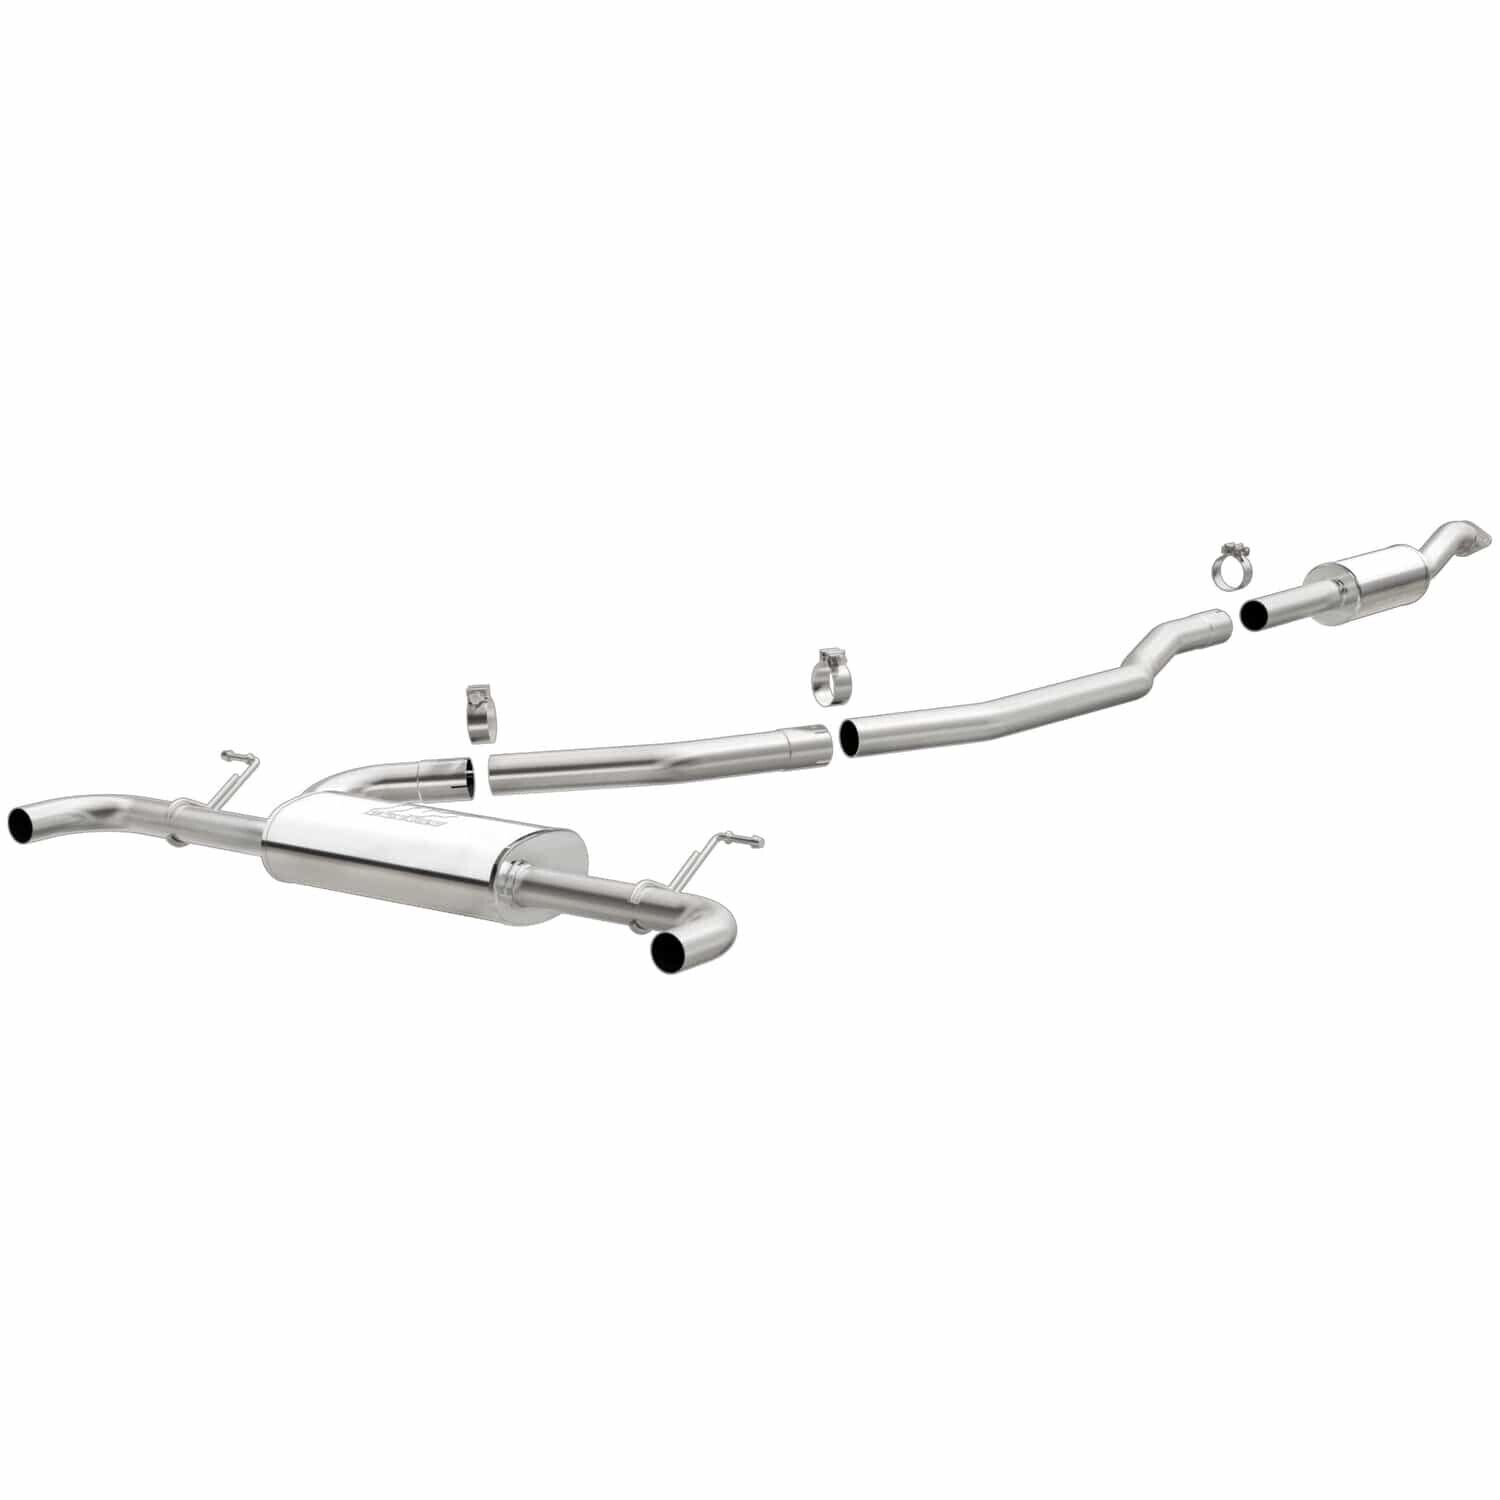 Exhaust System Kit-Street Stainless Catback Magnaflow 15230 2013-2020 Fusion/MKZ